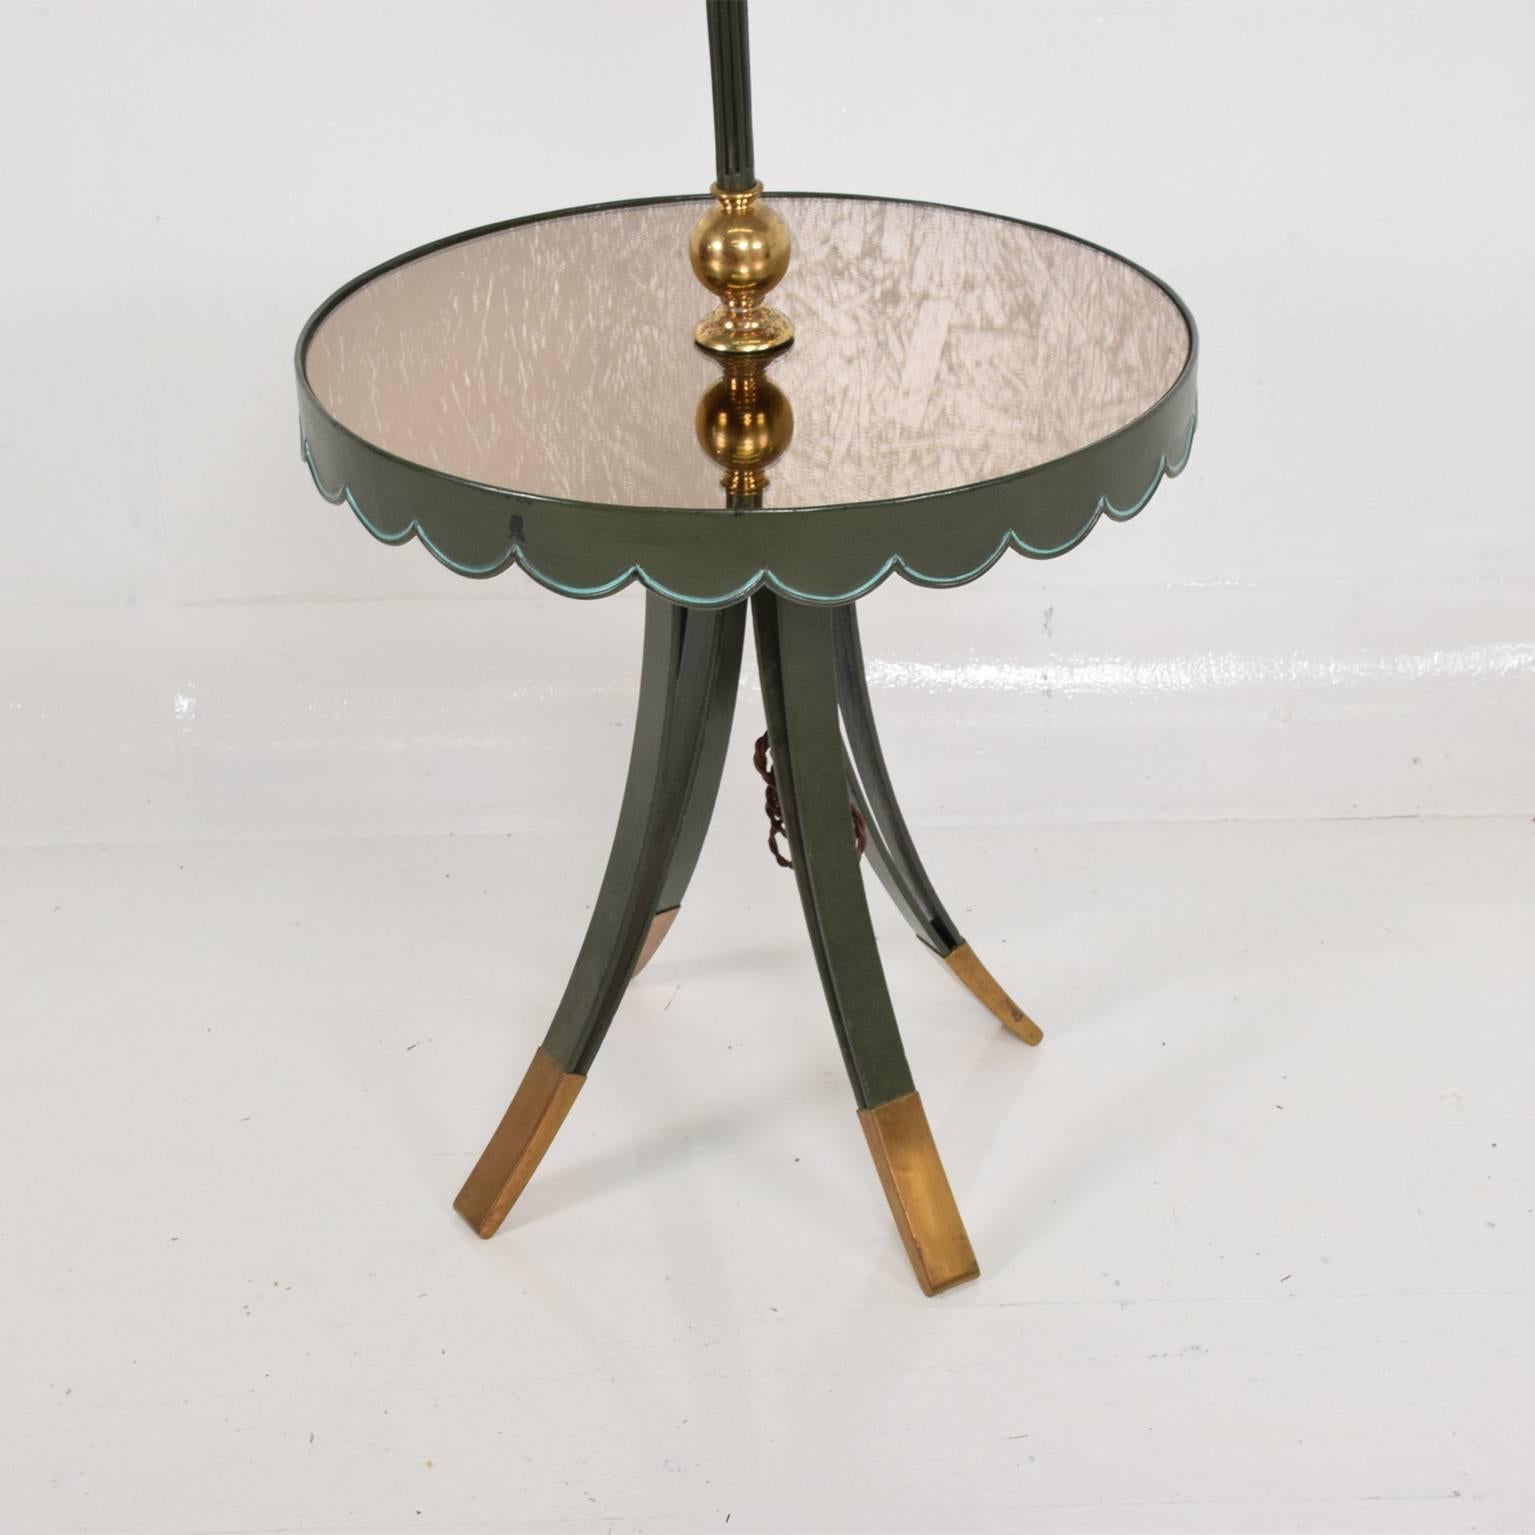 Arturo Pani Refined Elegance Floor Lamp with Scalloped Table Mexico City 1940s In Good Condition In Chula Vista, CA